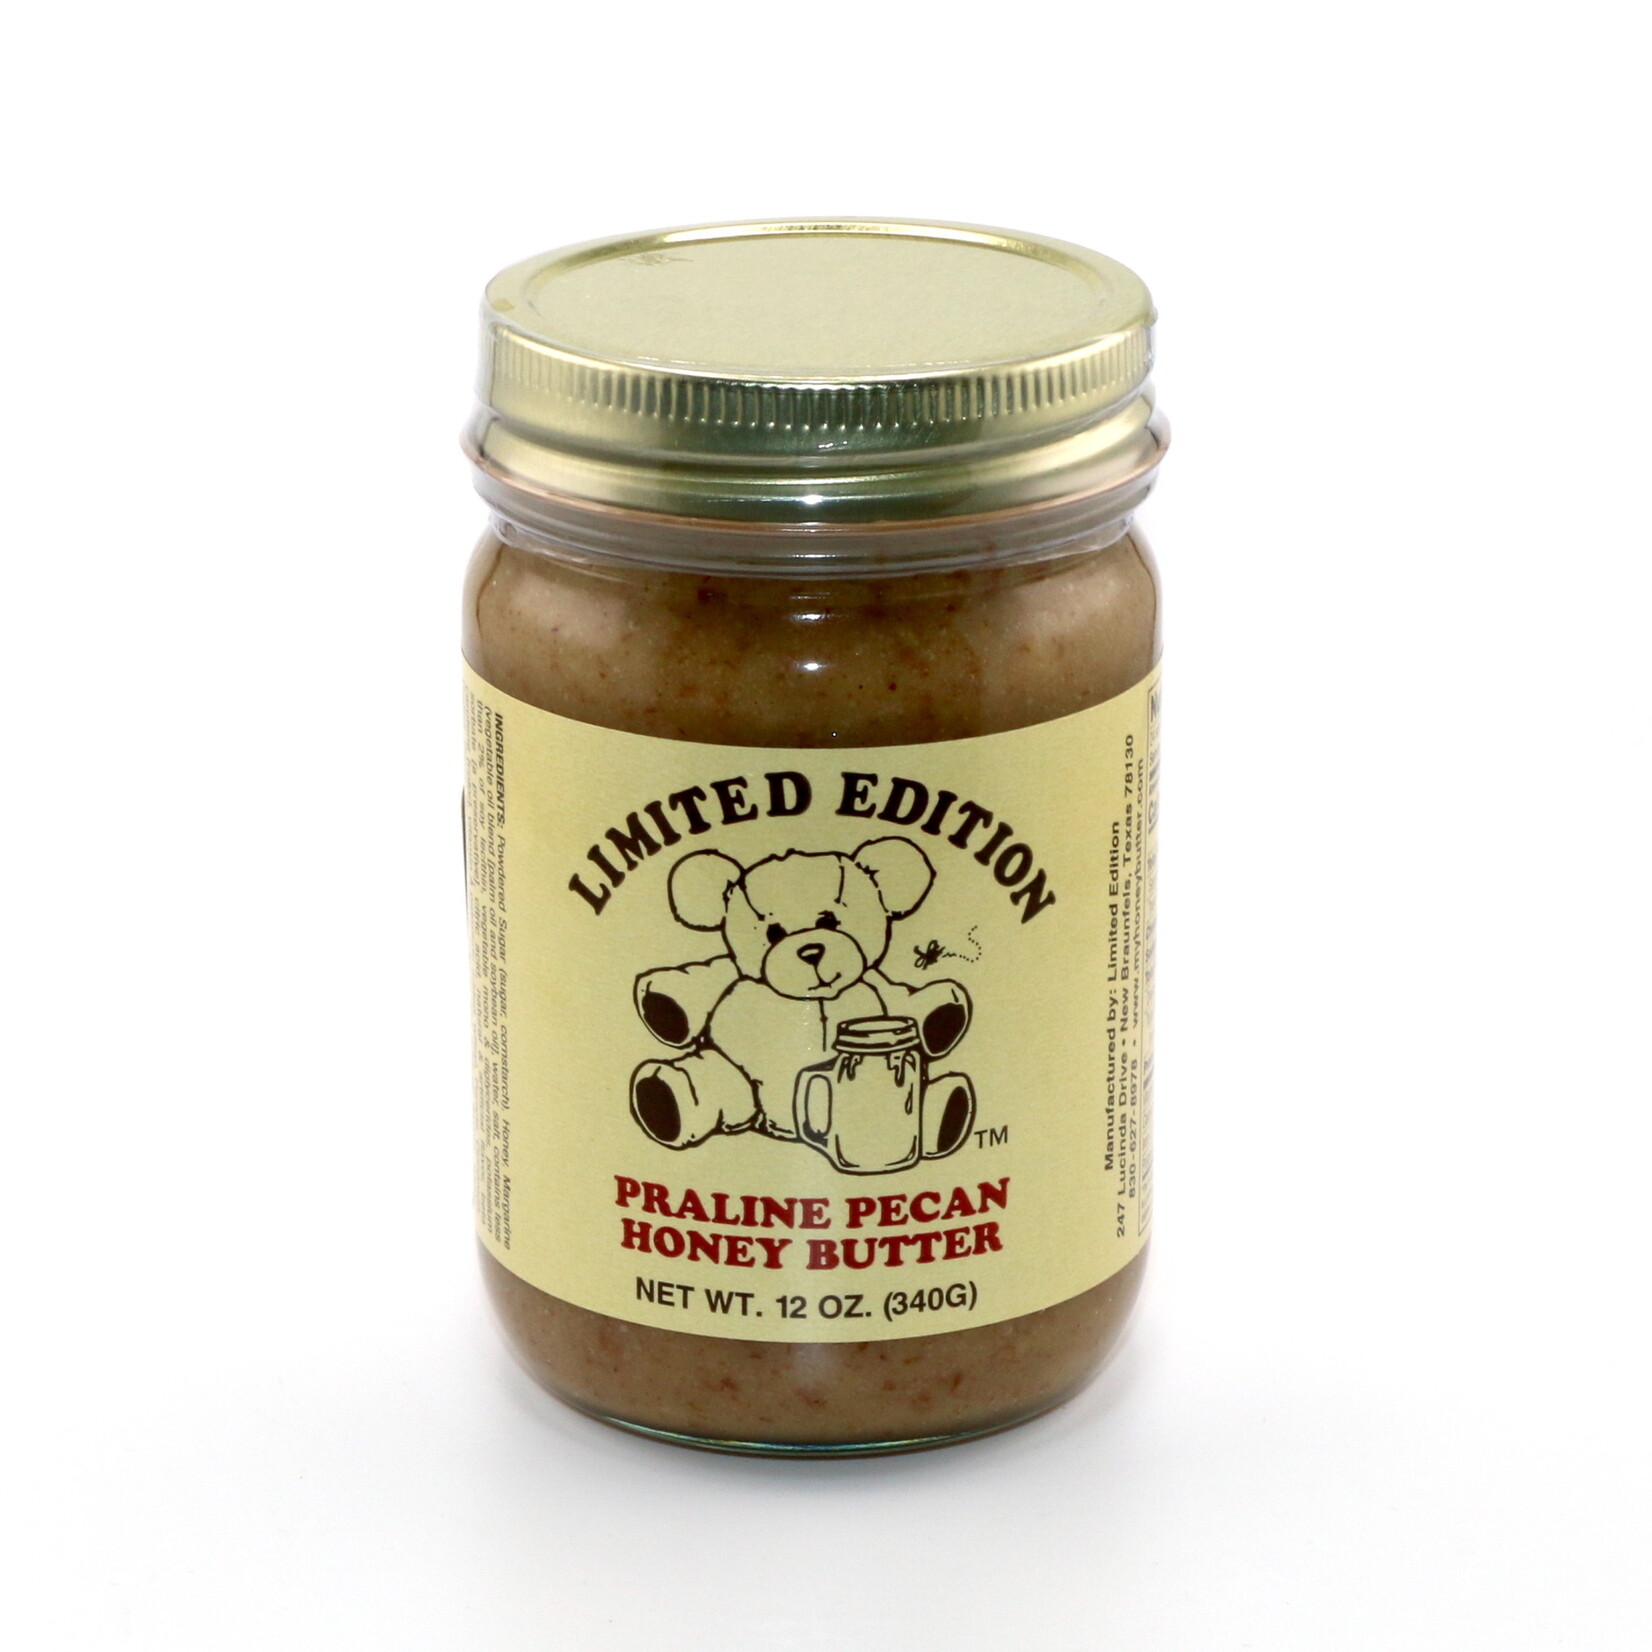 LIMITED EDITION PRESENTS Limited Edition Praline Pecan Honey Butter